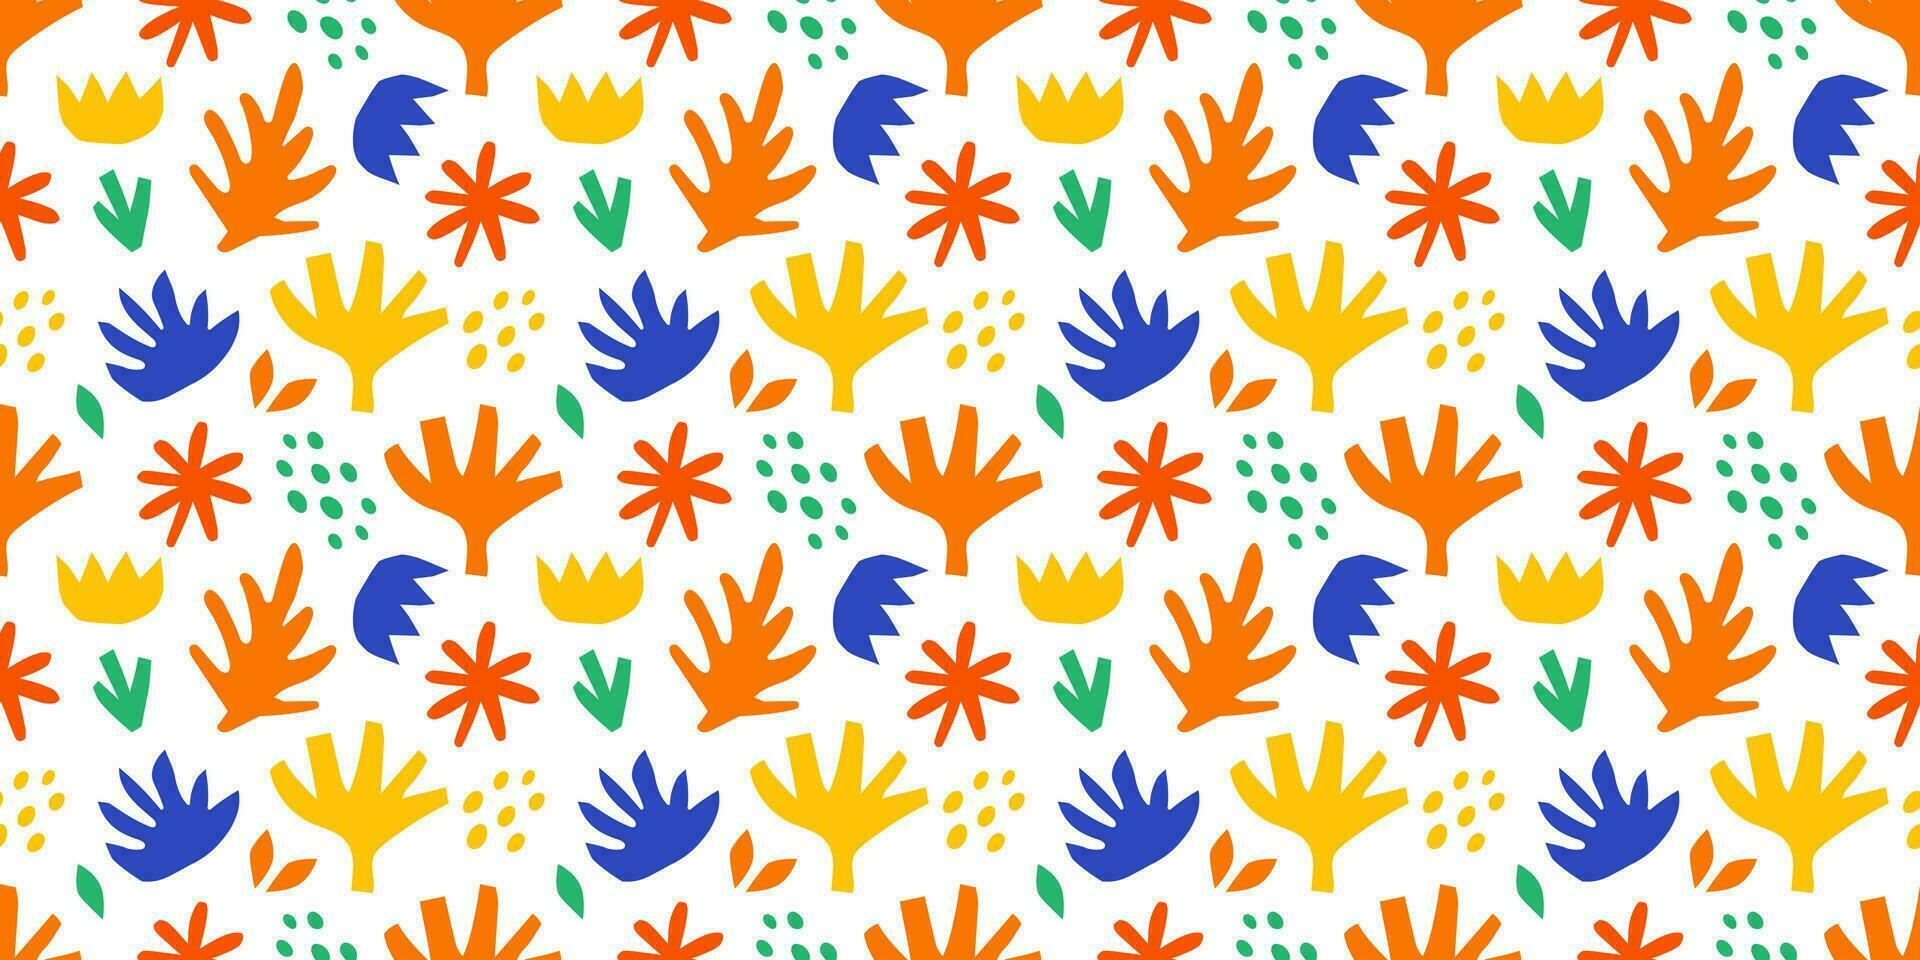 Summer abstract shapes tropical plants and doodles seamless pattern vector